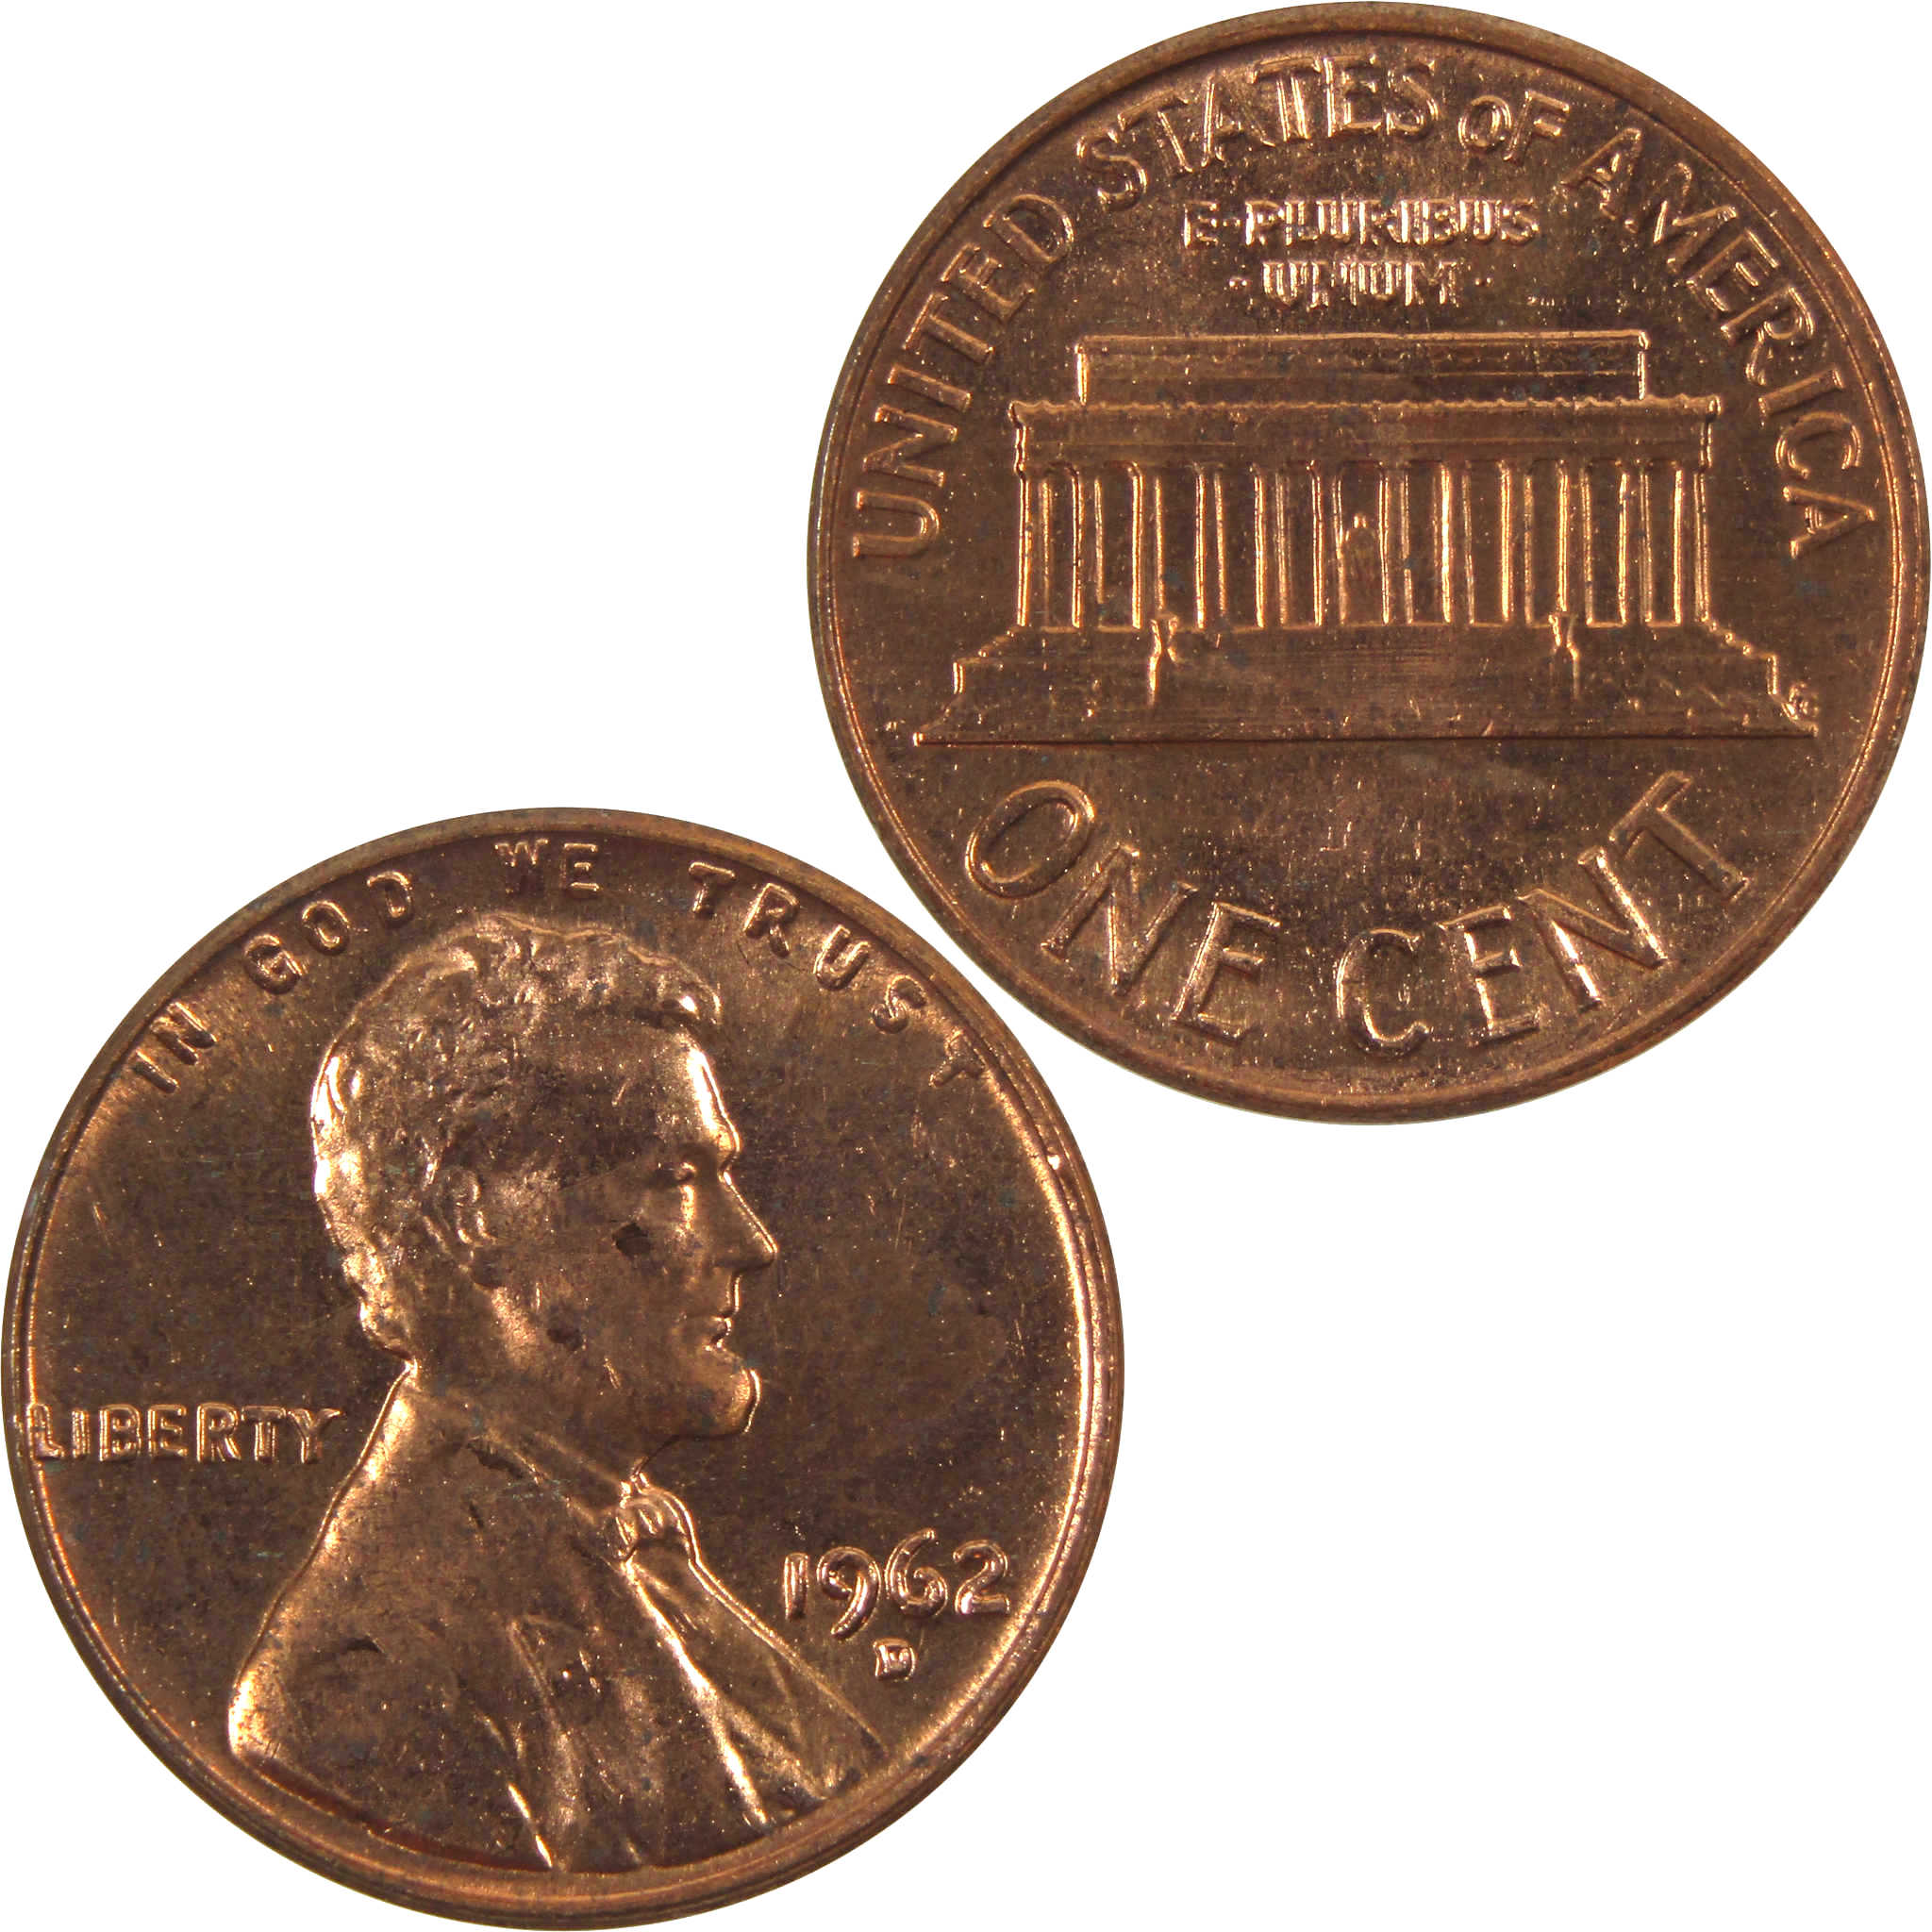 1962 D Lincoln Memorial Cent BU Uncirculated Penny 1c Coin